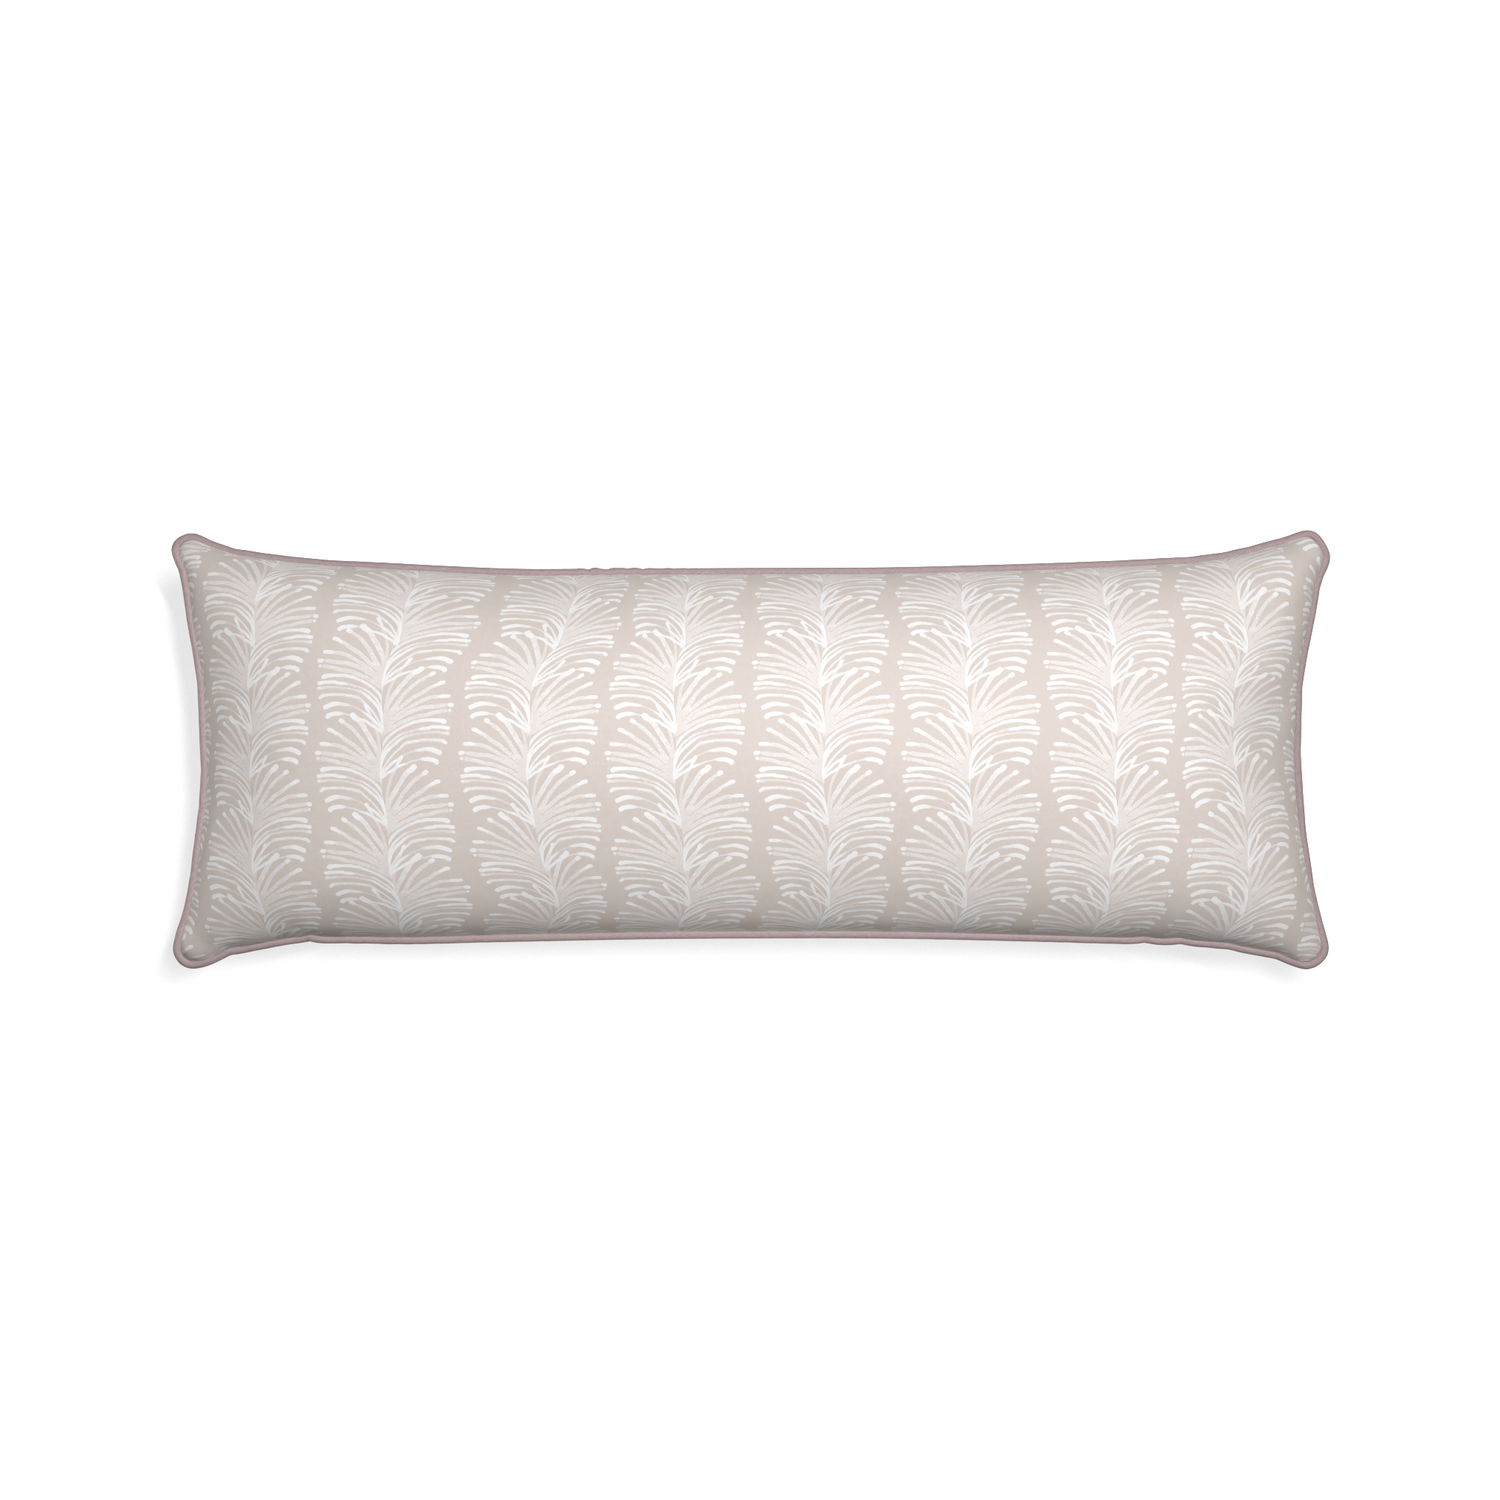 Xl-lumbar emma sand custom sand colored botanical stripepillow with orchid piping on white background